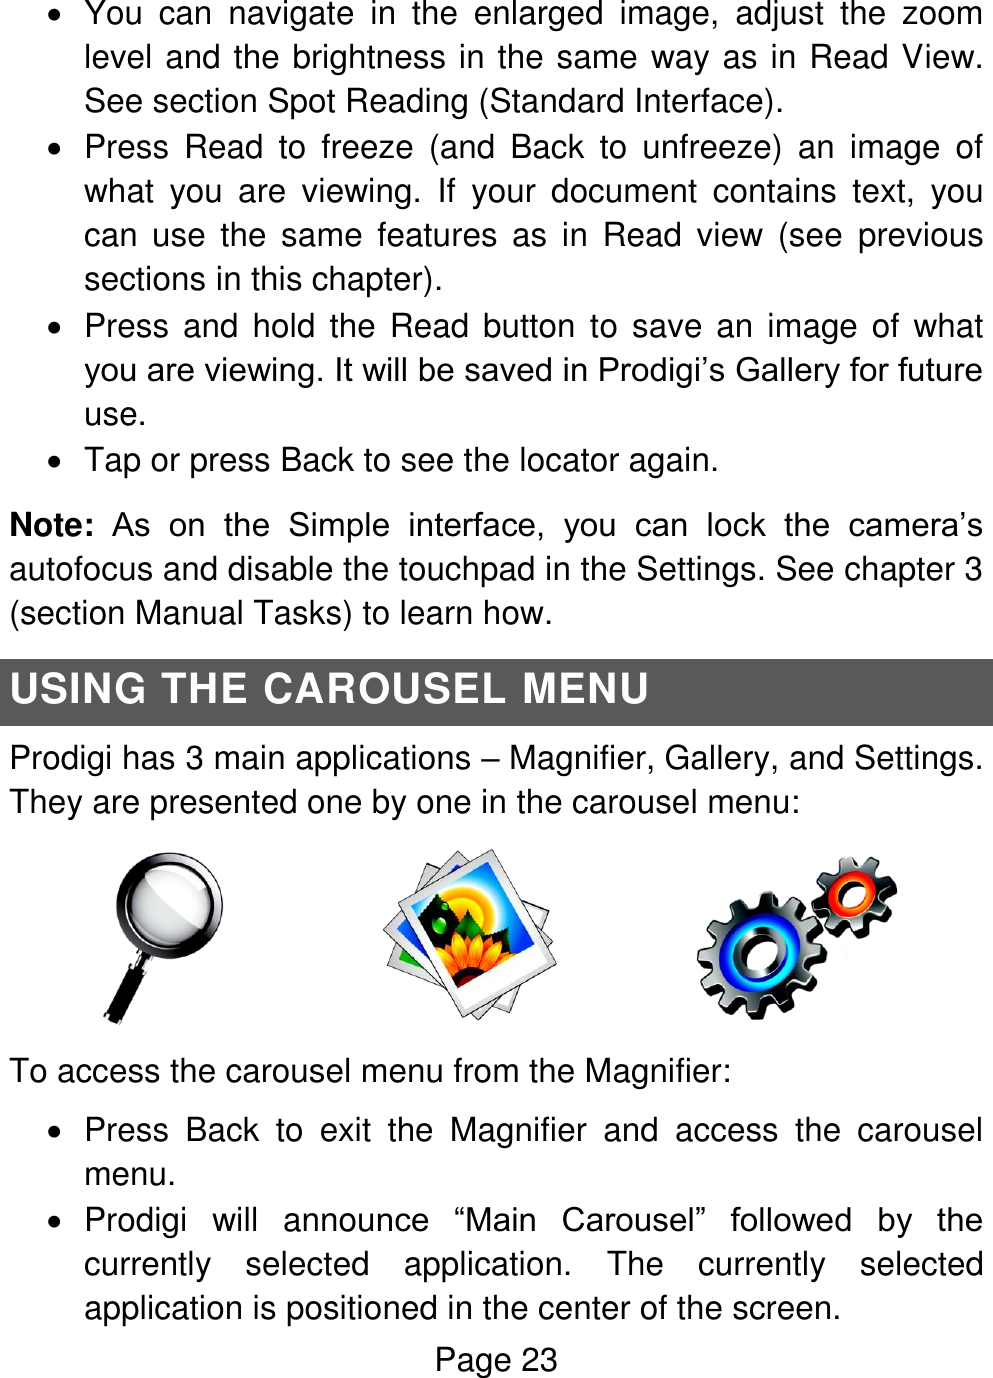 Page 23    You  can  navigate  in  the  enlarged  image,  adjust  the  zoom level and the brightness in the same way as in Read View. See section Spot Reading (Standard Interface).   Press  Read  to  freeze  (and  Back  to  unfreeze)  an  image  of what  you  are  viewing.  If  your  document  contains  text,  you can  use  the  same  features  as  in  Read  view  (see  previous sections in this chapter).   Press and hold the  Read button to save an image of what you are viewing. It will be saved in Prodigi’s Gallery for future use.    Tap or press Back to see the locator again. Note: As  on  the  Simple  interface,  you  can  lock  the  camera’s autofocus and disable the touchpad in the Settings. See chapter 3 (section Manual Tasks) to learn how. USING THE CAROUSEL MENU Prodigi has 3 main applications – Magnifier, Gallery, and Settings. They are presented one by one in the carousel menu:                                         To access the carousel menu from the Magnifier:   Press  Back  to  exit  the  Magnifier  and  access  the  carousel menu.   Prodigi  will  announce  “Main  Carousel”  followed  by  the currently  selected  application.  The  currently  selected application is positioned in the center of the screen. 